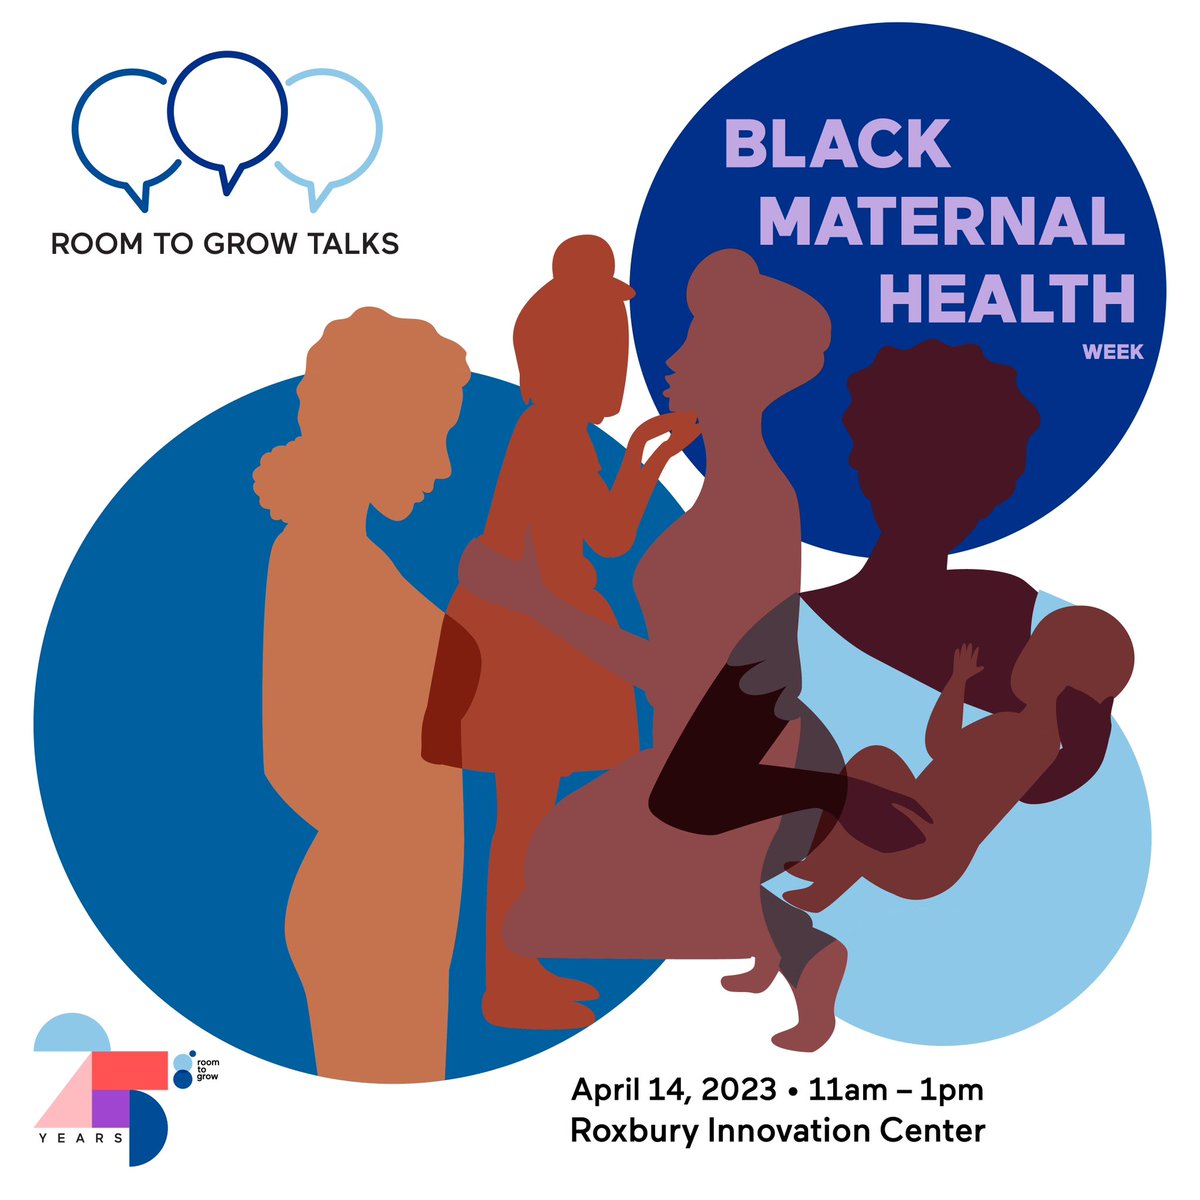 I’m participating in @RoomtoGrow_org’s discussion on Black maternal health to raise awareness and recognize the health inequities facing Black mothers and birthing people in the U.S. Tune in to learn more on Friday, April 14 at 11:15 AM ET. bit.ly/3GD3VOl